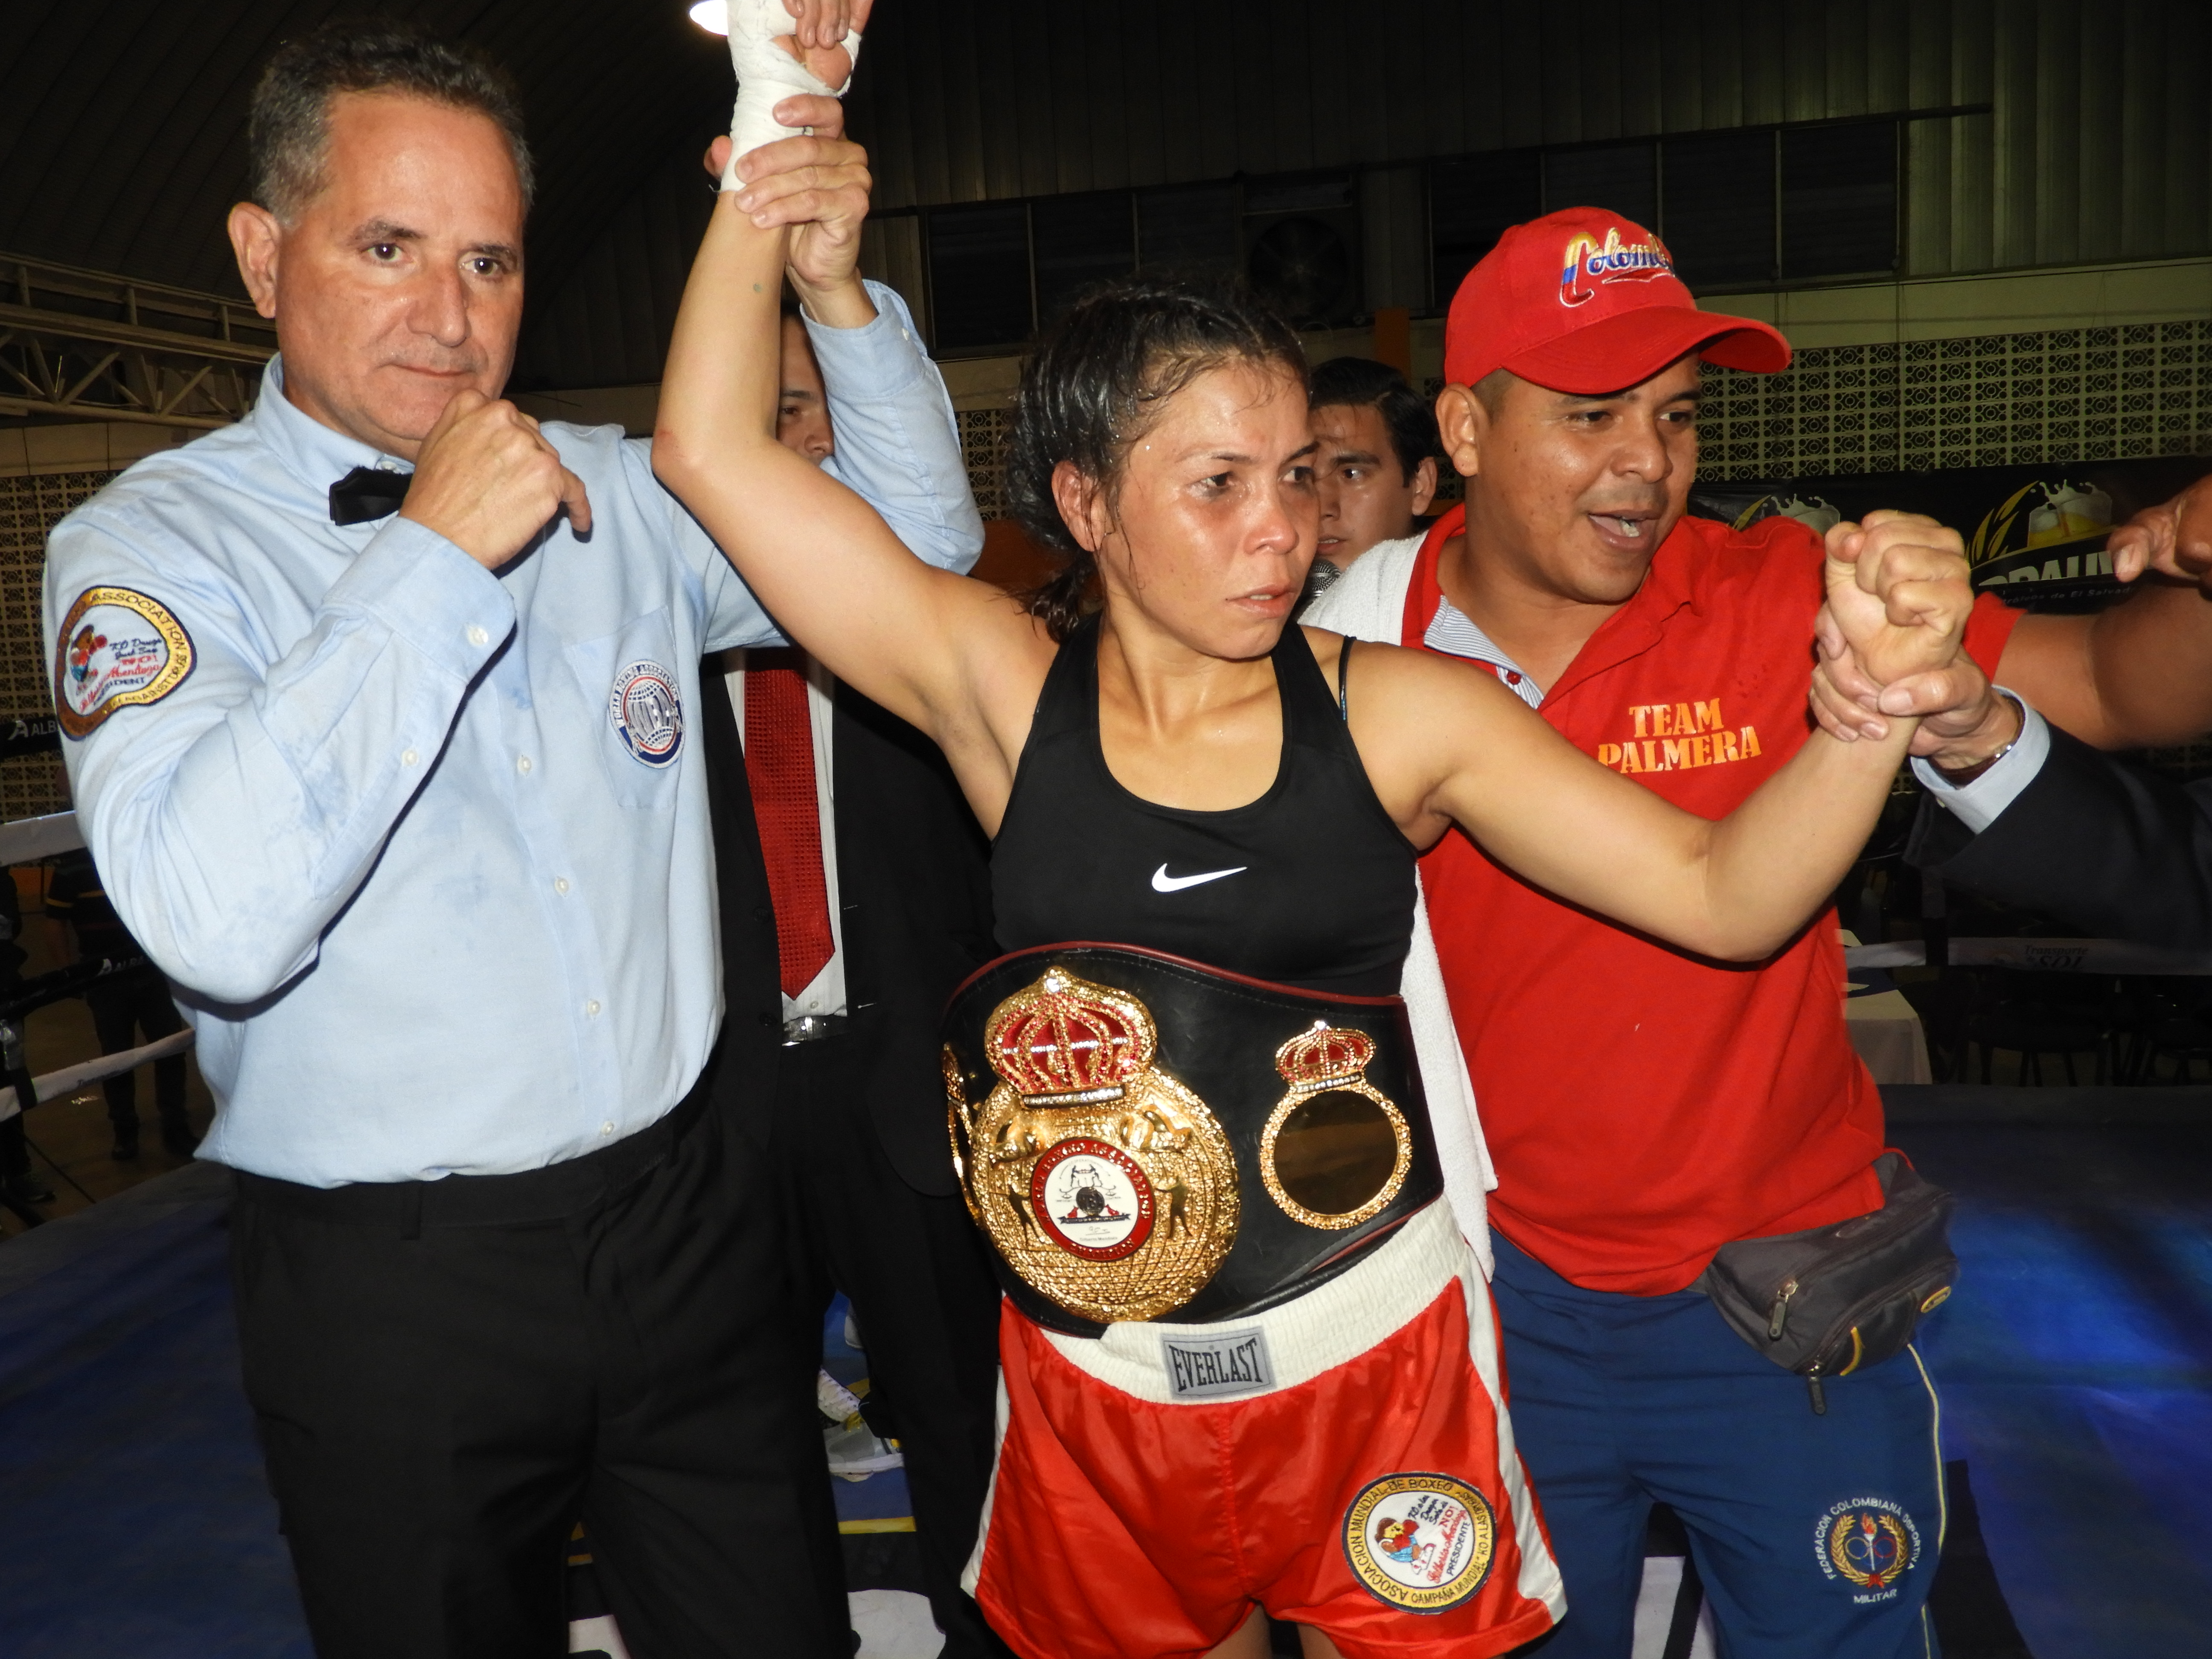 Liliana Palmera imposed her will and is the new WBA champion